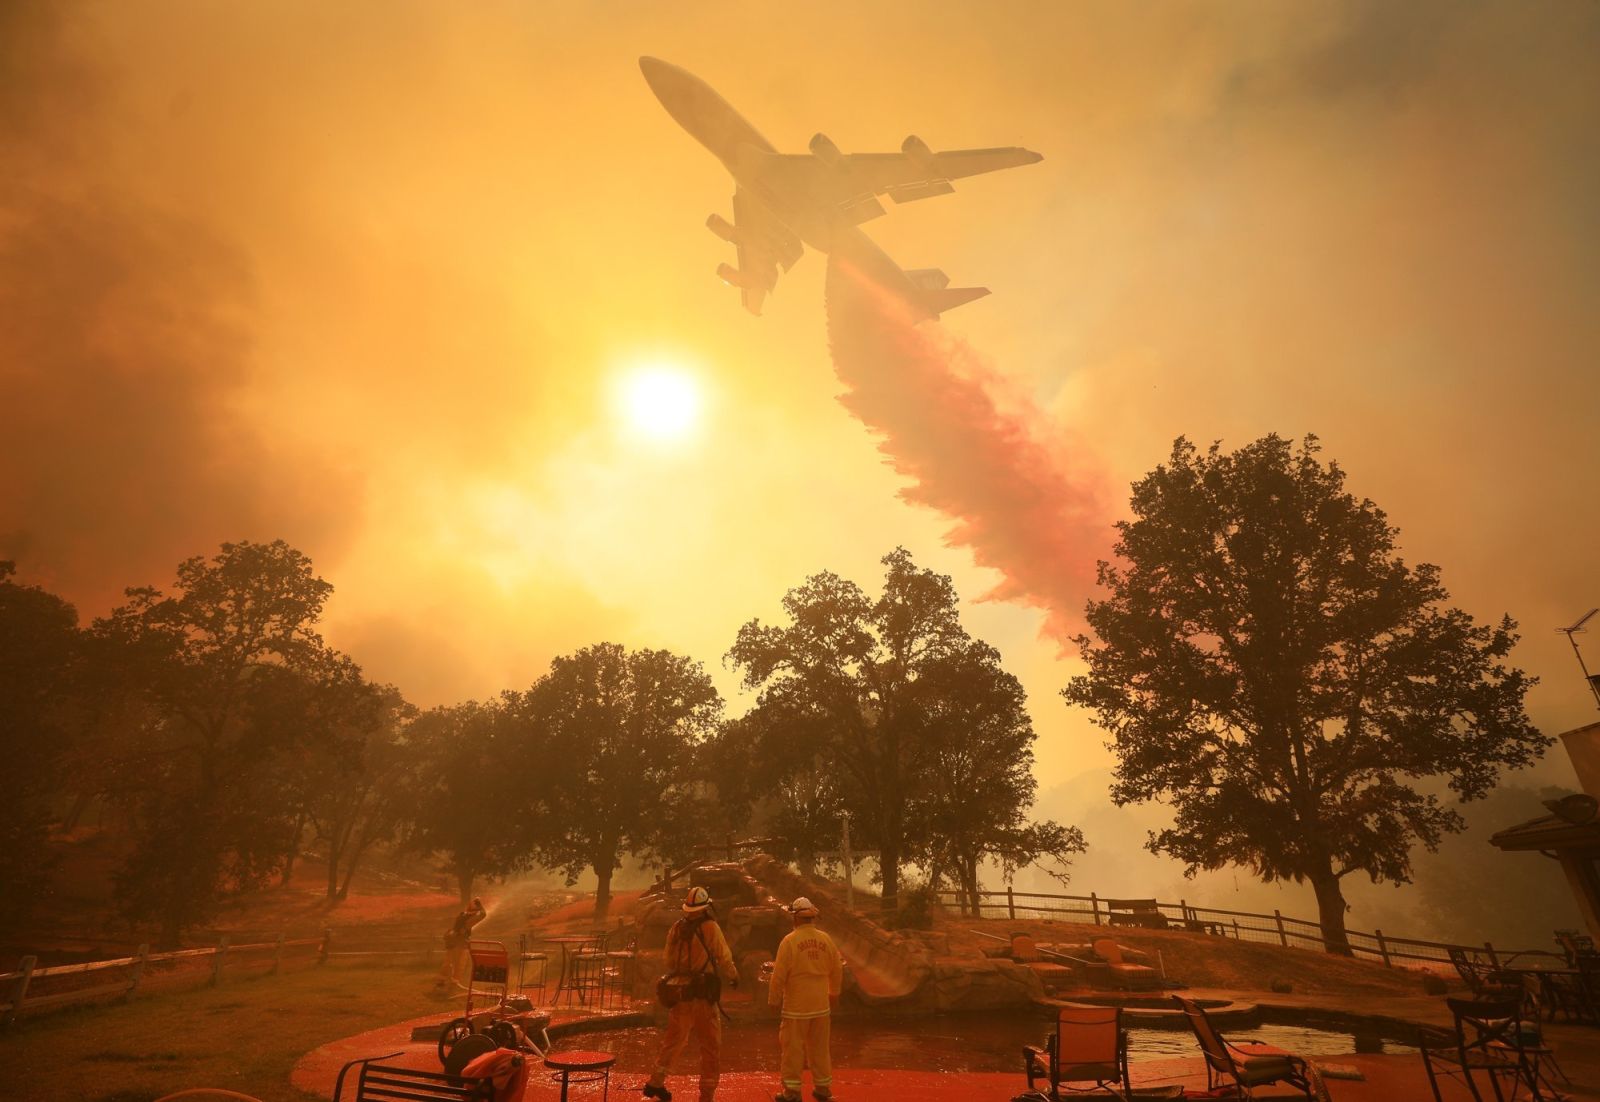 Illustration for article titled 747 Tanker Fighting California Wildfire